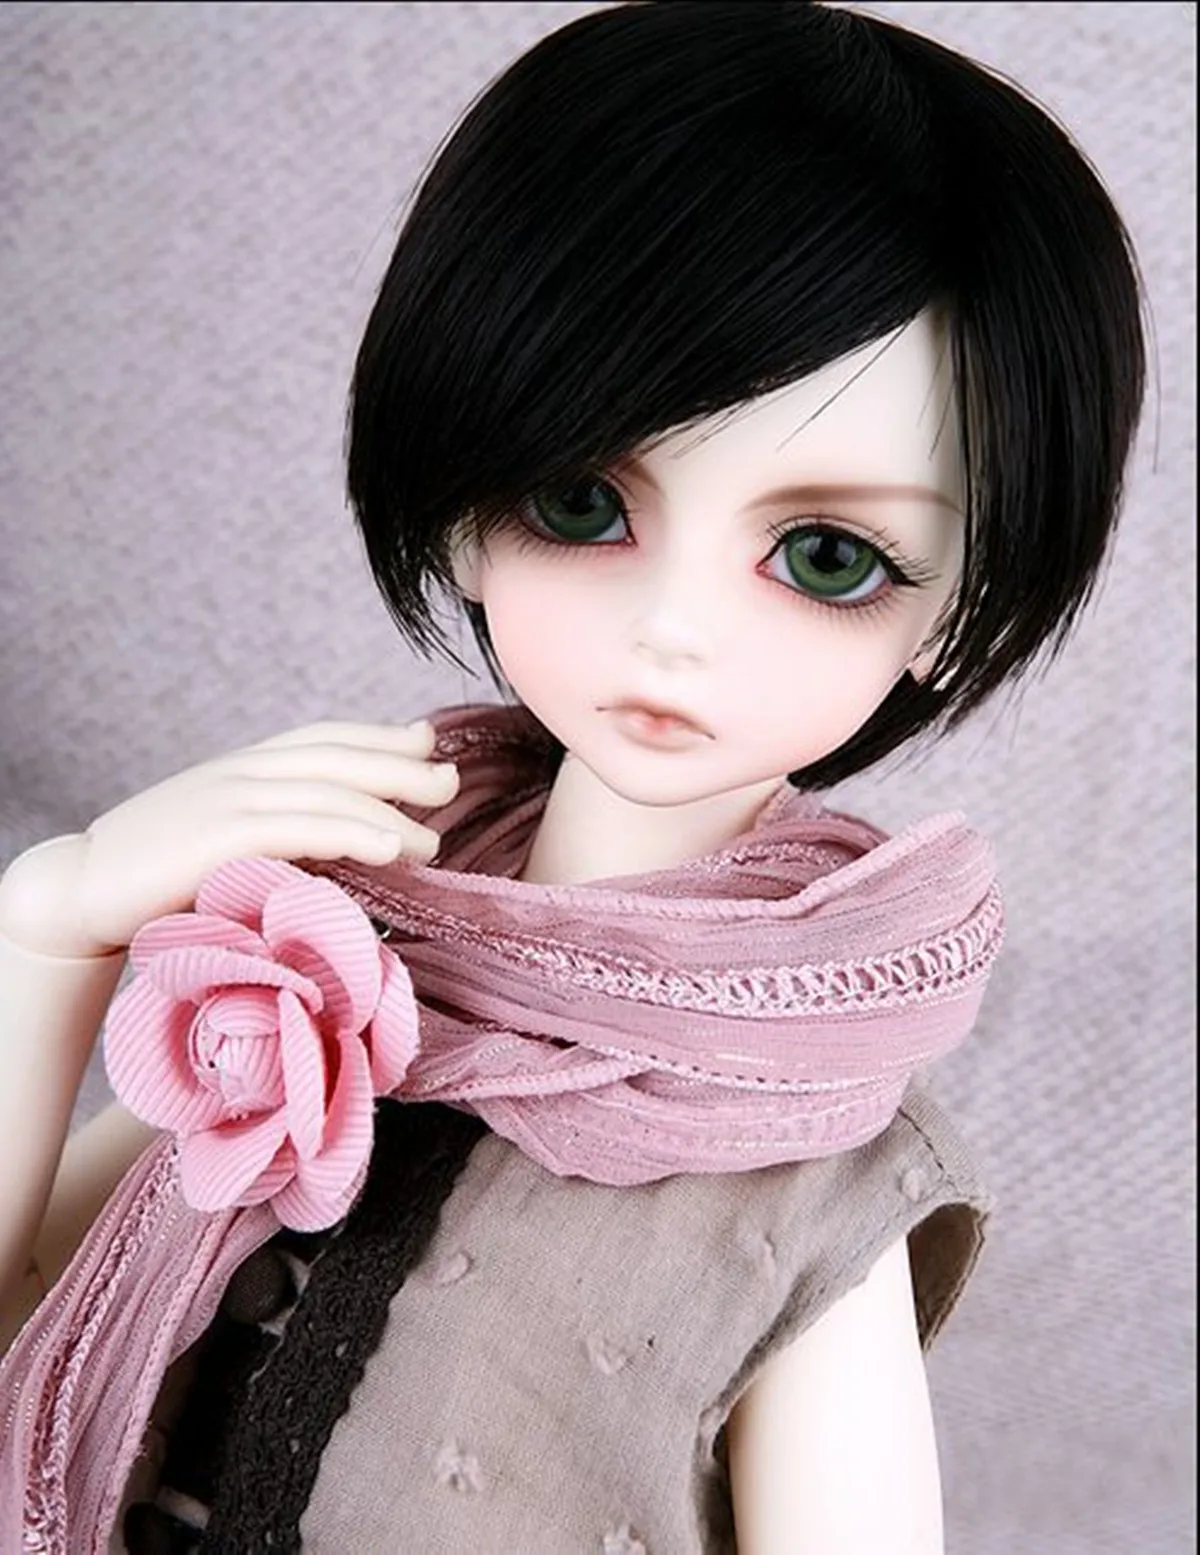 

New Premium Resin Boy 1/4 (41cm)bjd sd doll Boy BORY bjd(include and eyes) Makeup from stock